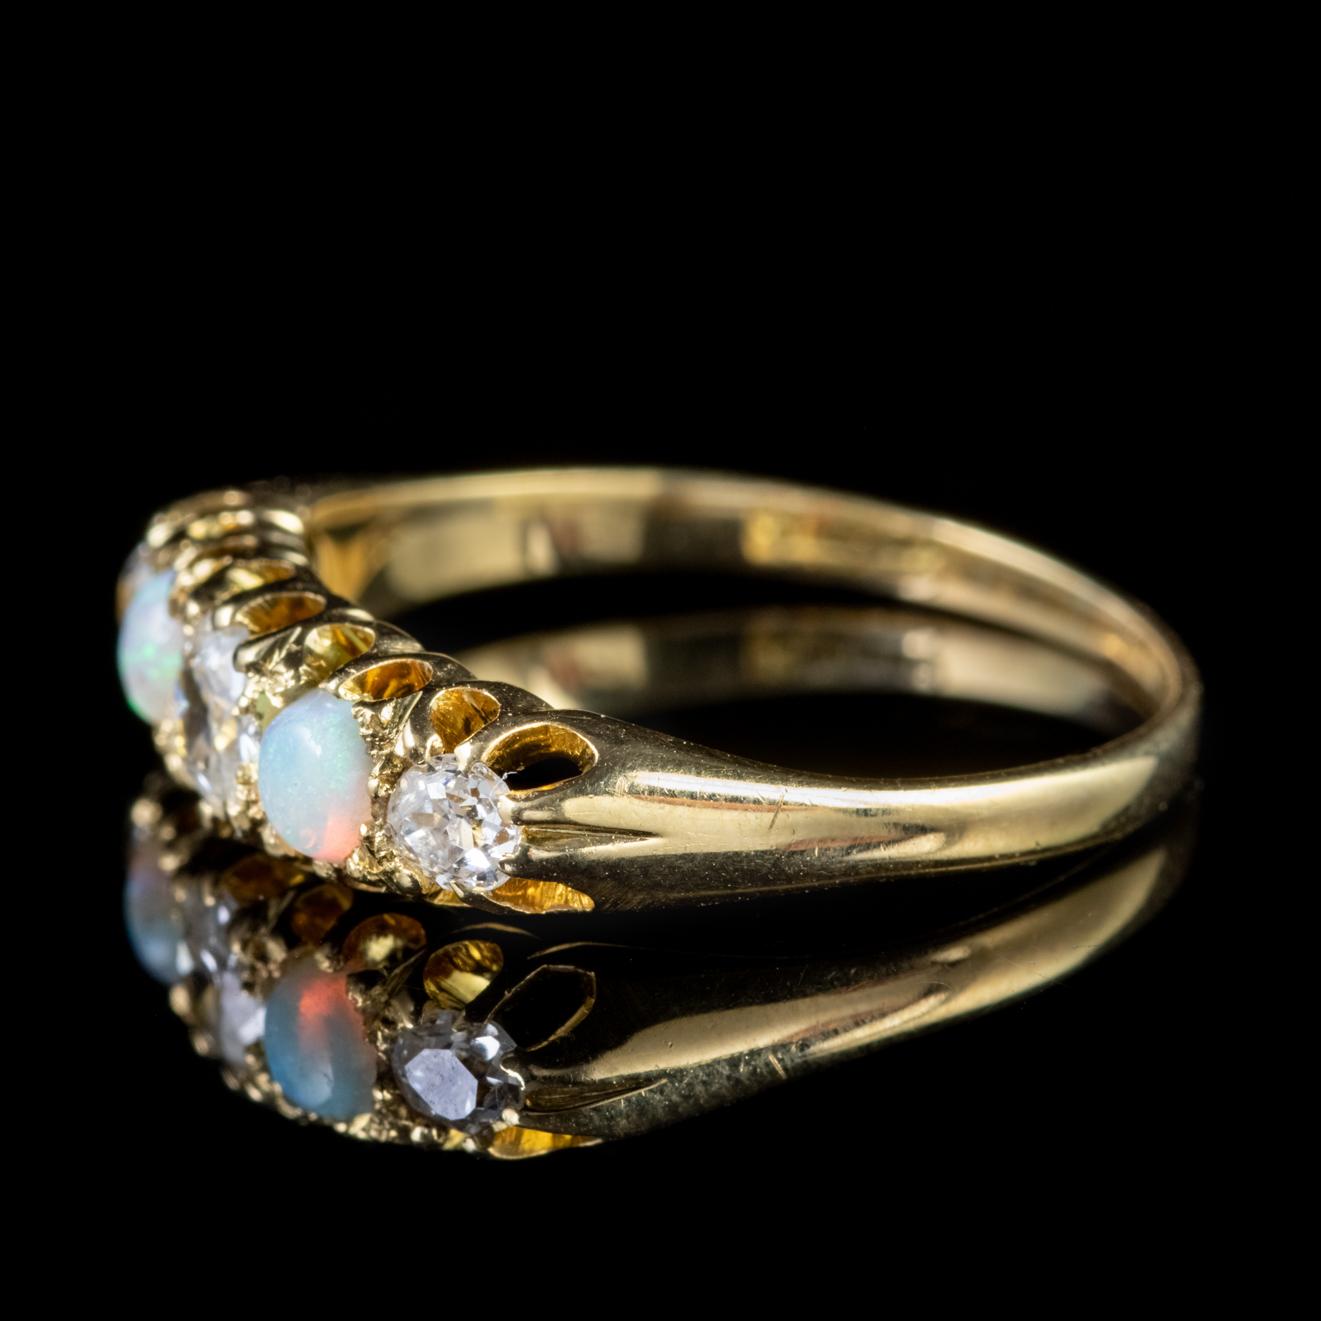 Antique Victorian Opal Diamond Ring 18 Carat Gold, circa 1900 In Good Condition For Sale In Lancaster, Lancashire